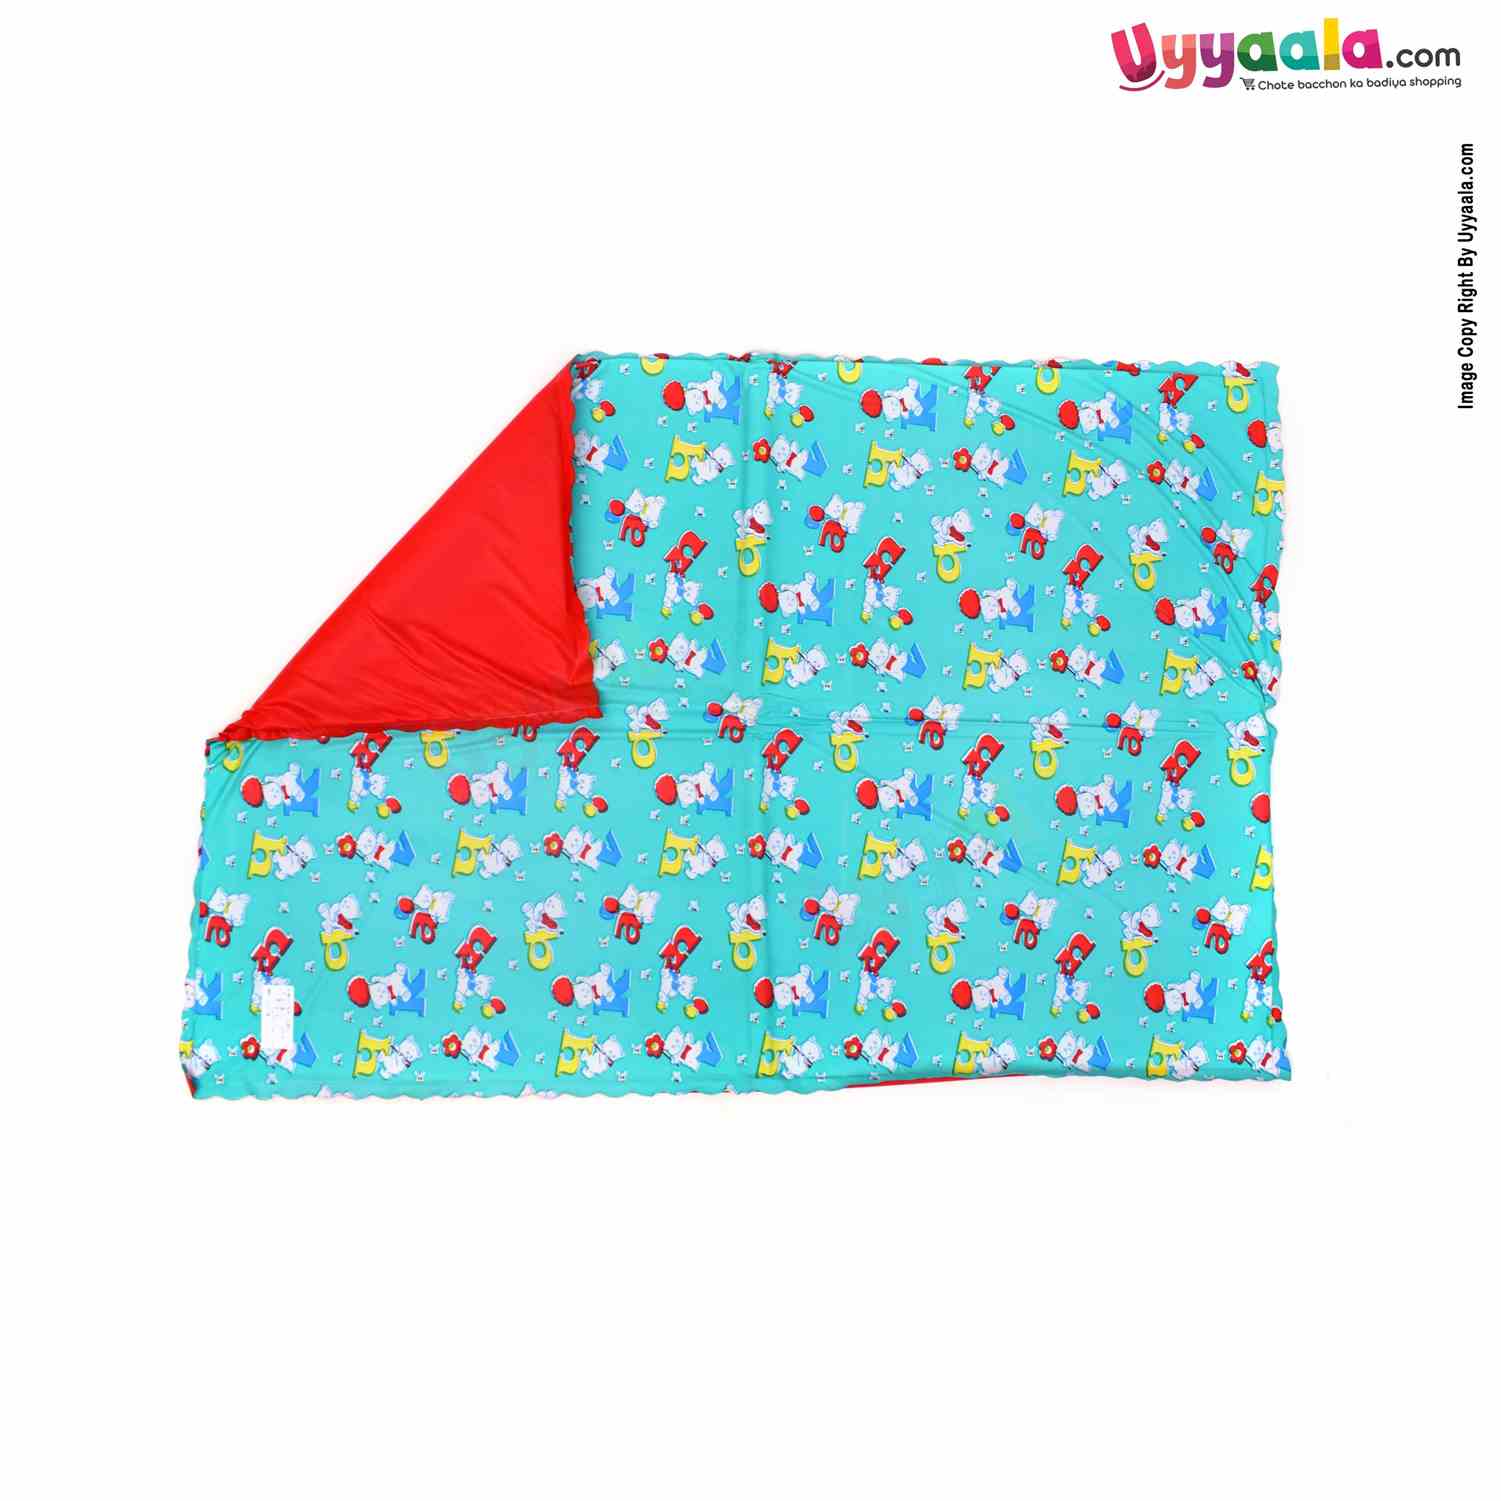 Plastic Sleeping mats Water Proof bed Protector with Foam Cushioned for Babies with Alphabets & Teddy Bear Print Medium